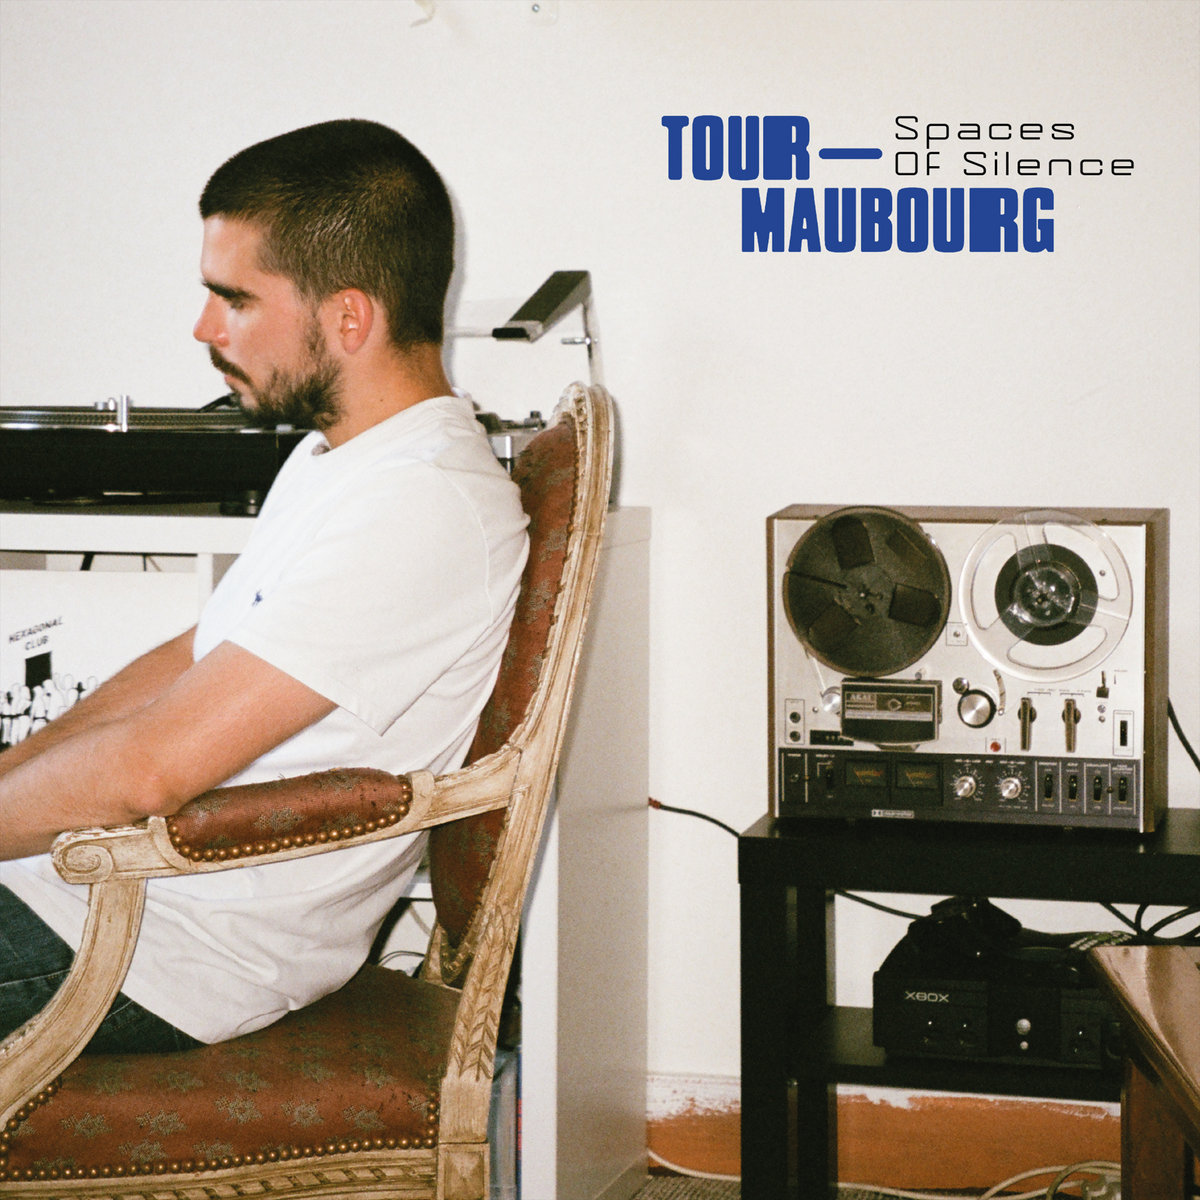 Tour-Maubourg-Spaces-of-Silence Tour-Maubourg - Spaces of Silence